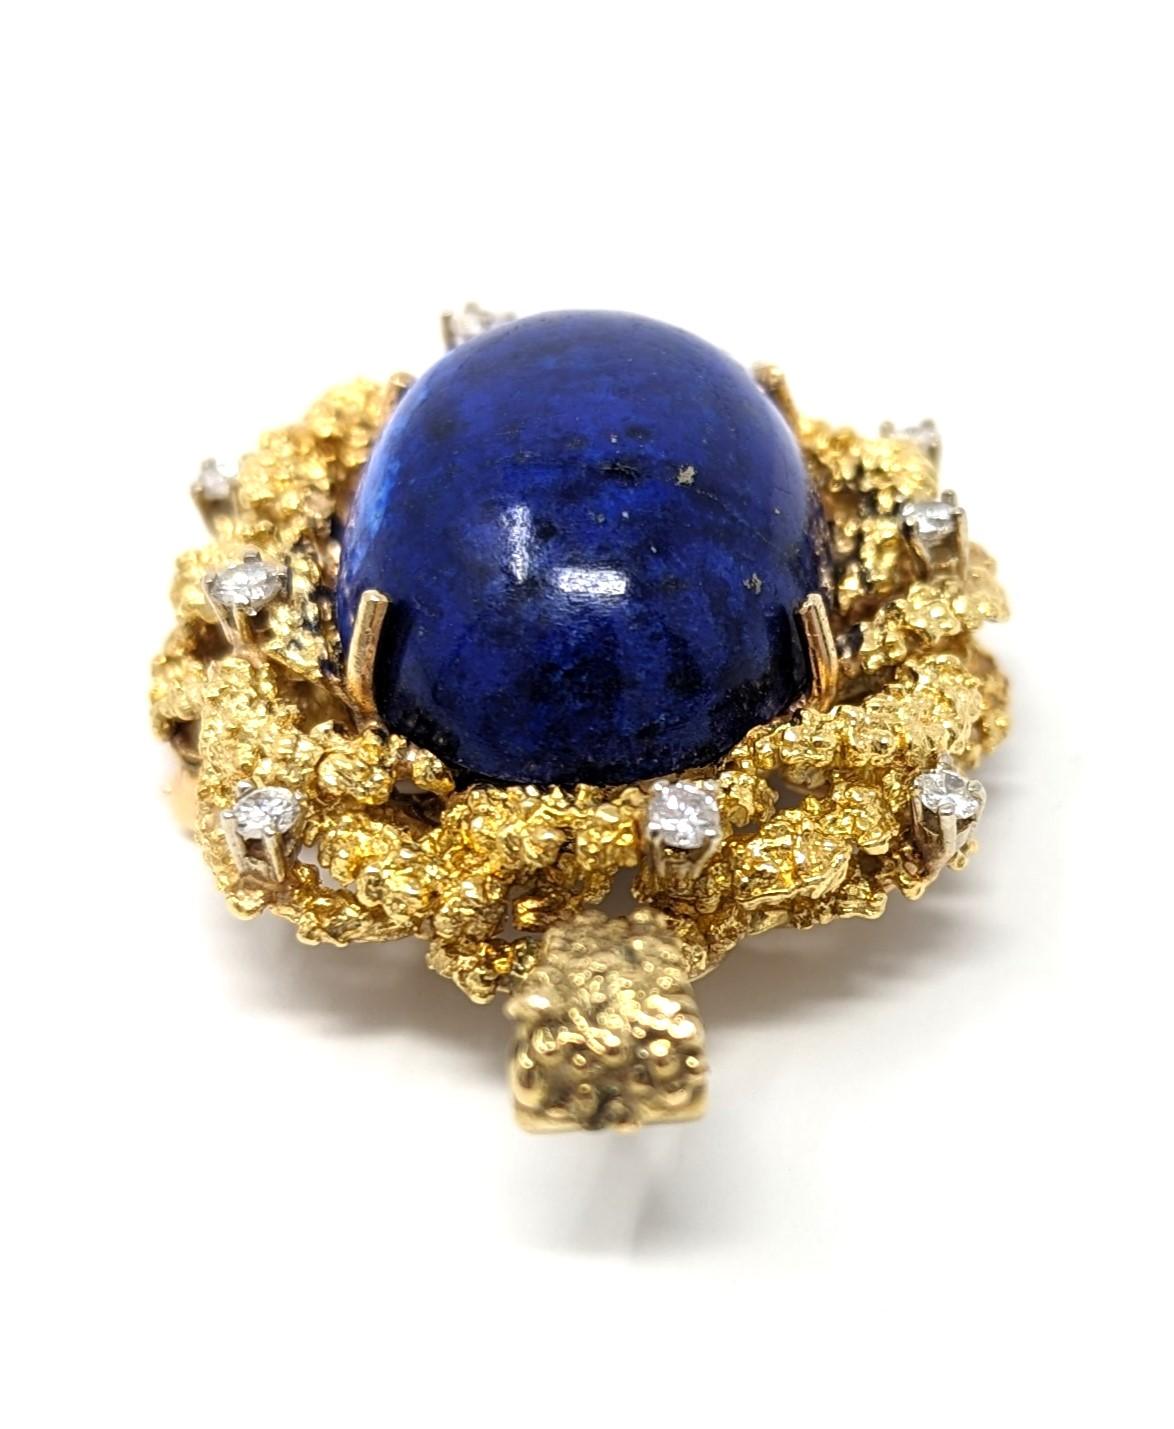 Vintage 18k Lapis Lazuli Diamond Pendant Brooch Pin Brutalist Solid Yellow Gold In Good Condition For Sale In Greer, SC